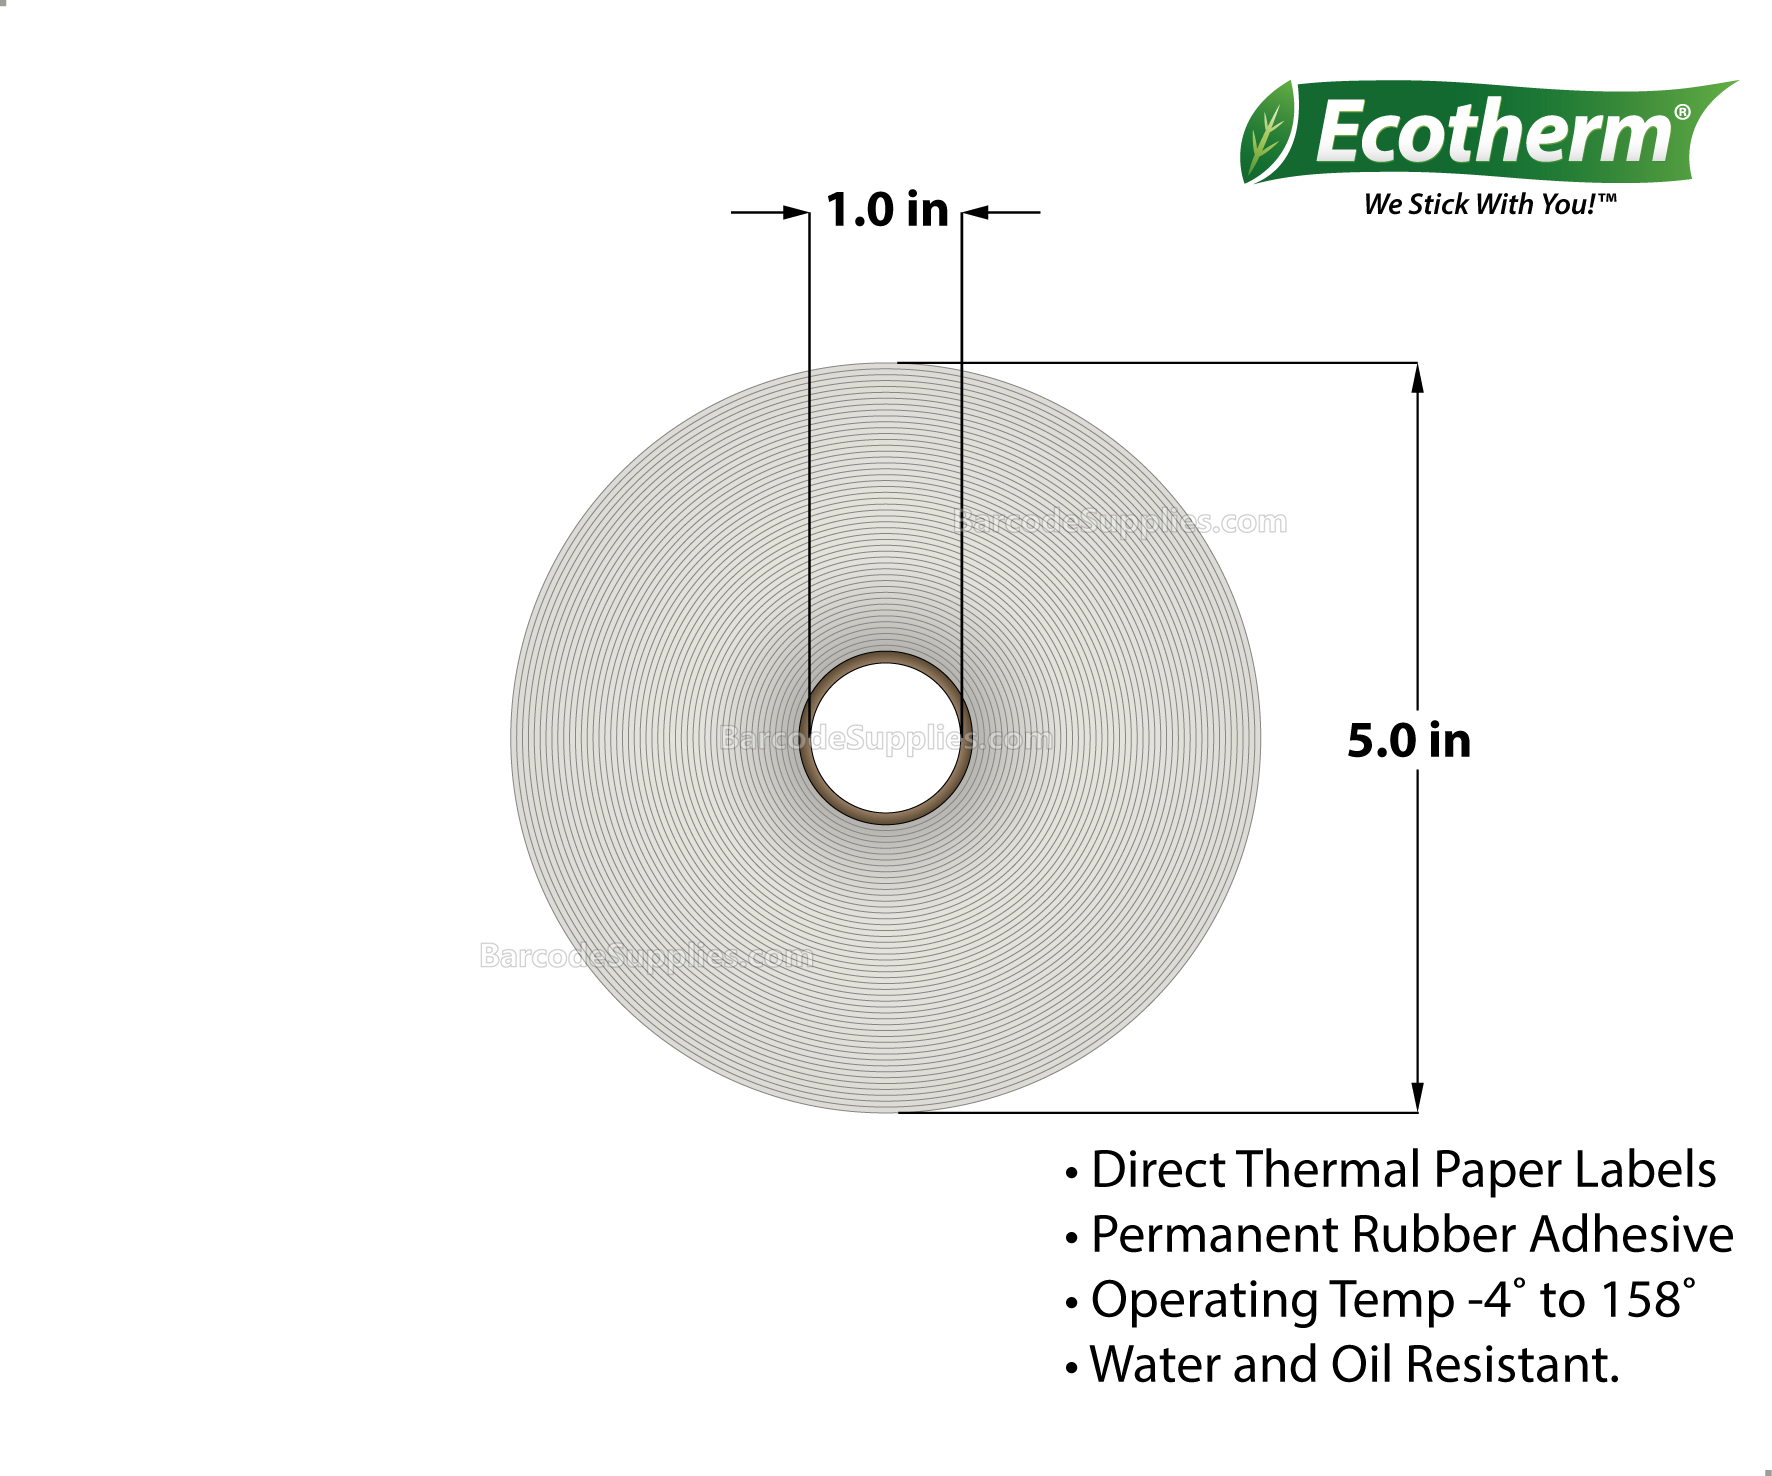 Products 1.5 x 1 Direct Thermal White Labels With Rubber Adhesive - Perforated - 1325 Labels Per Roll - Carton Of 6 Rolls - 11400 Labels Total - MPN: ECOTHERM15158-6